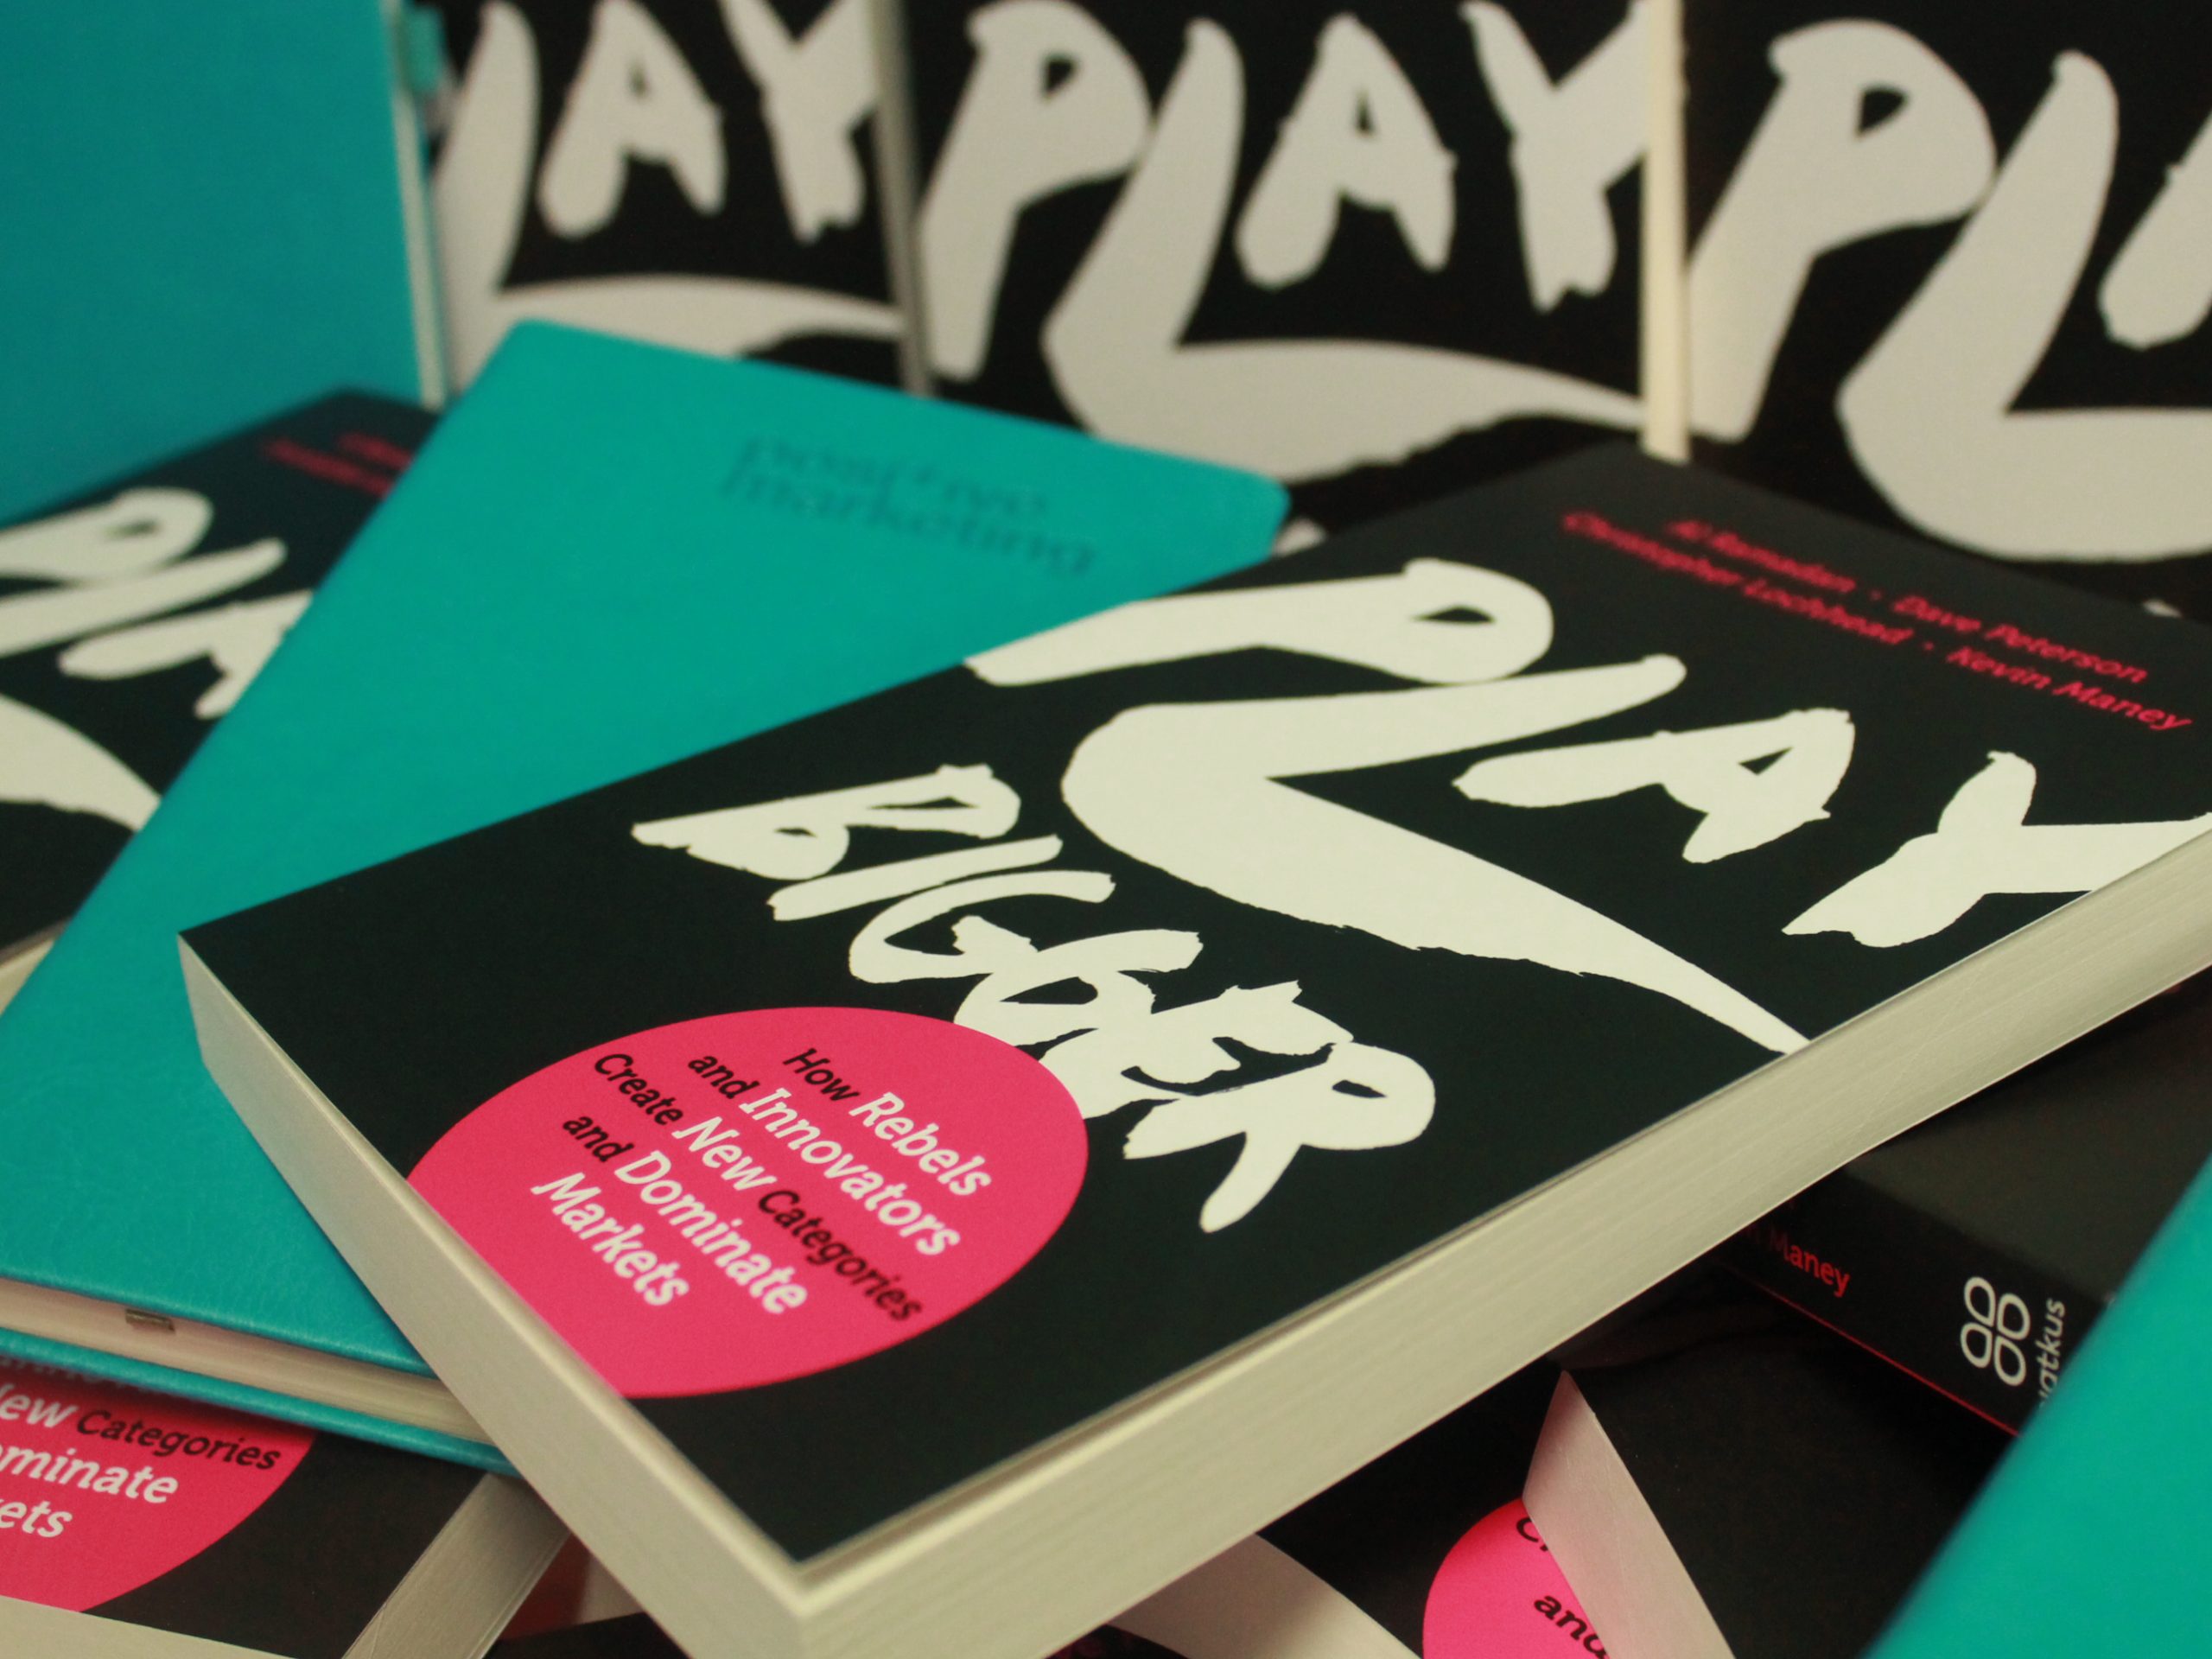 A Play Bigger book and a Positive branded notebook on the Play Bigger stand - Businesses